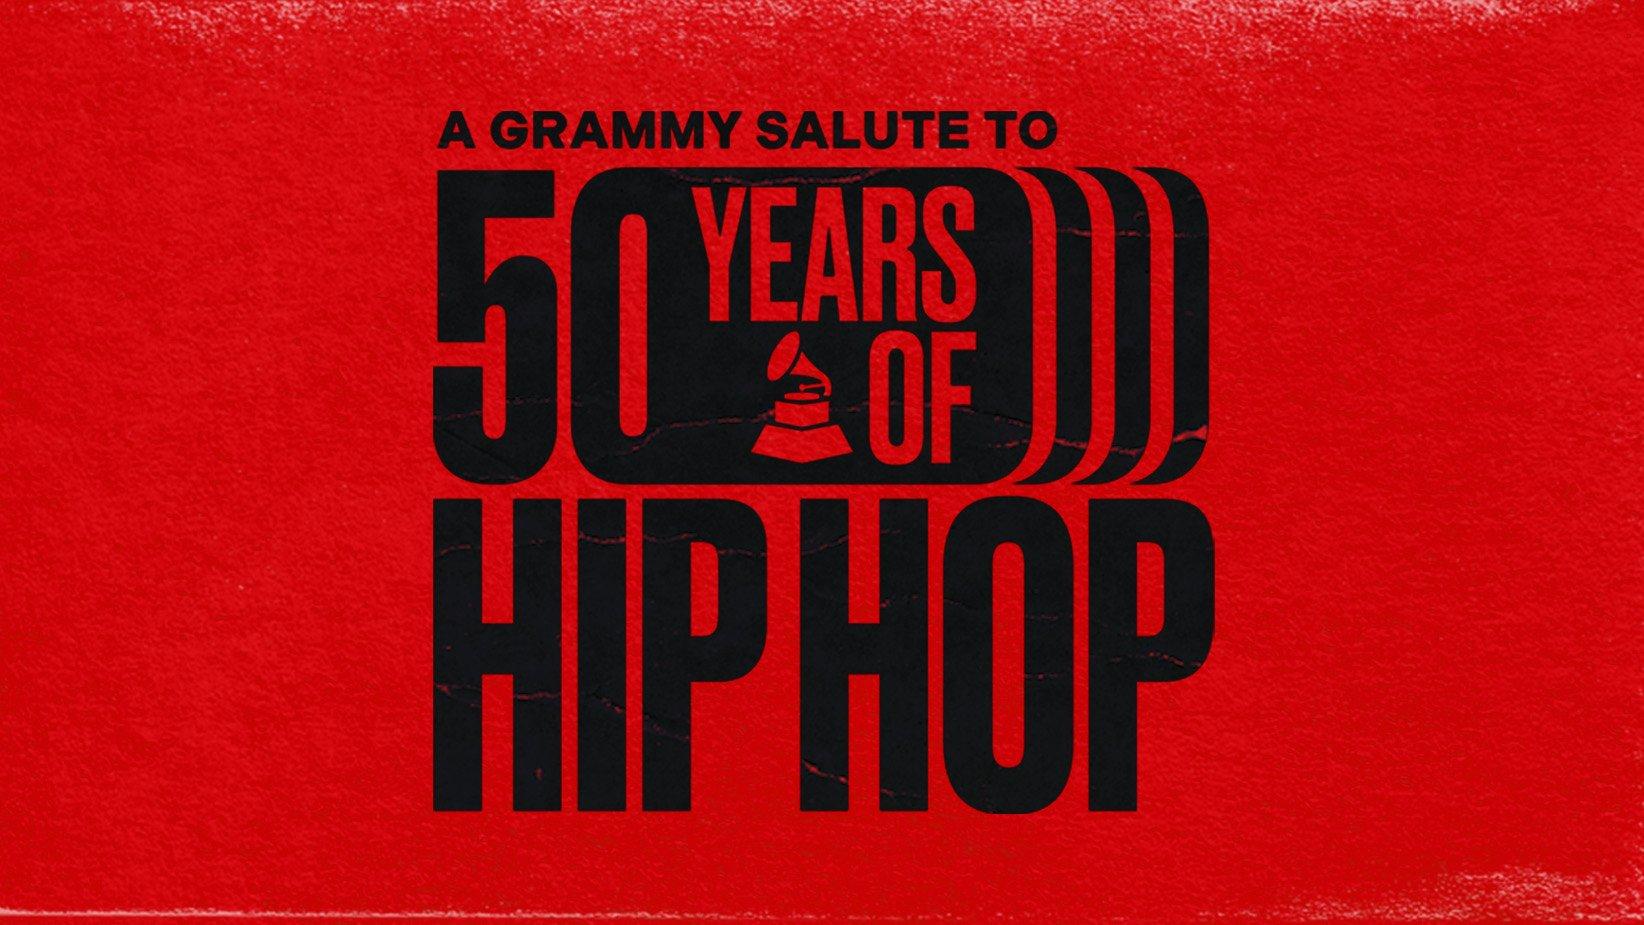 The Recording Academy And CBS Announce “A GRAMMY Salute To